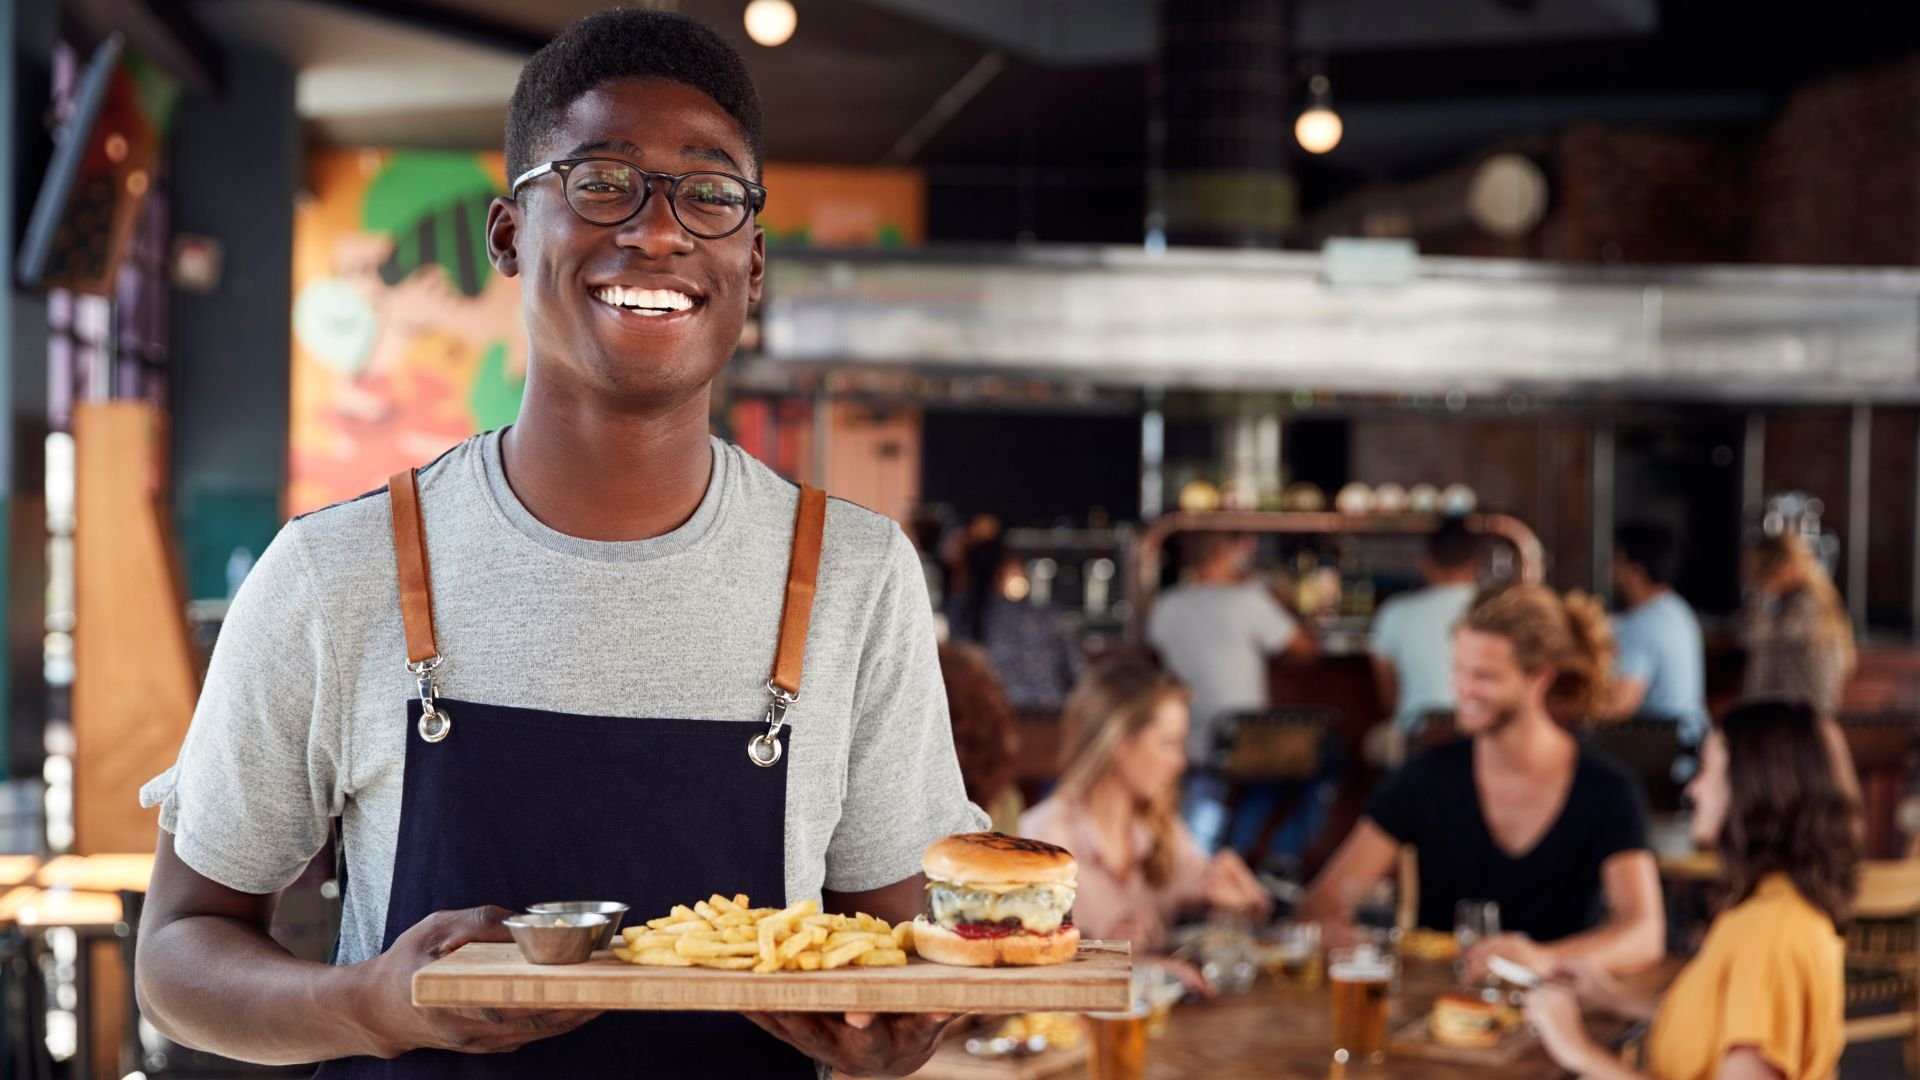 Photo of male restaurant server holding a meal of burger and fries on a board in a gastro pub